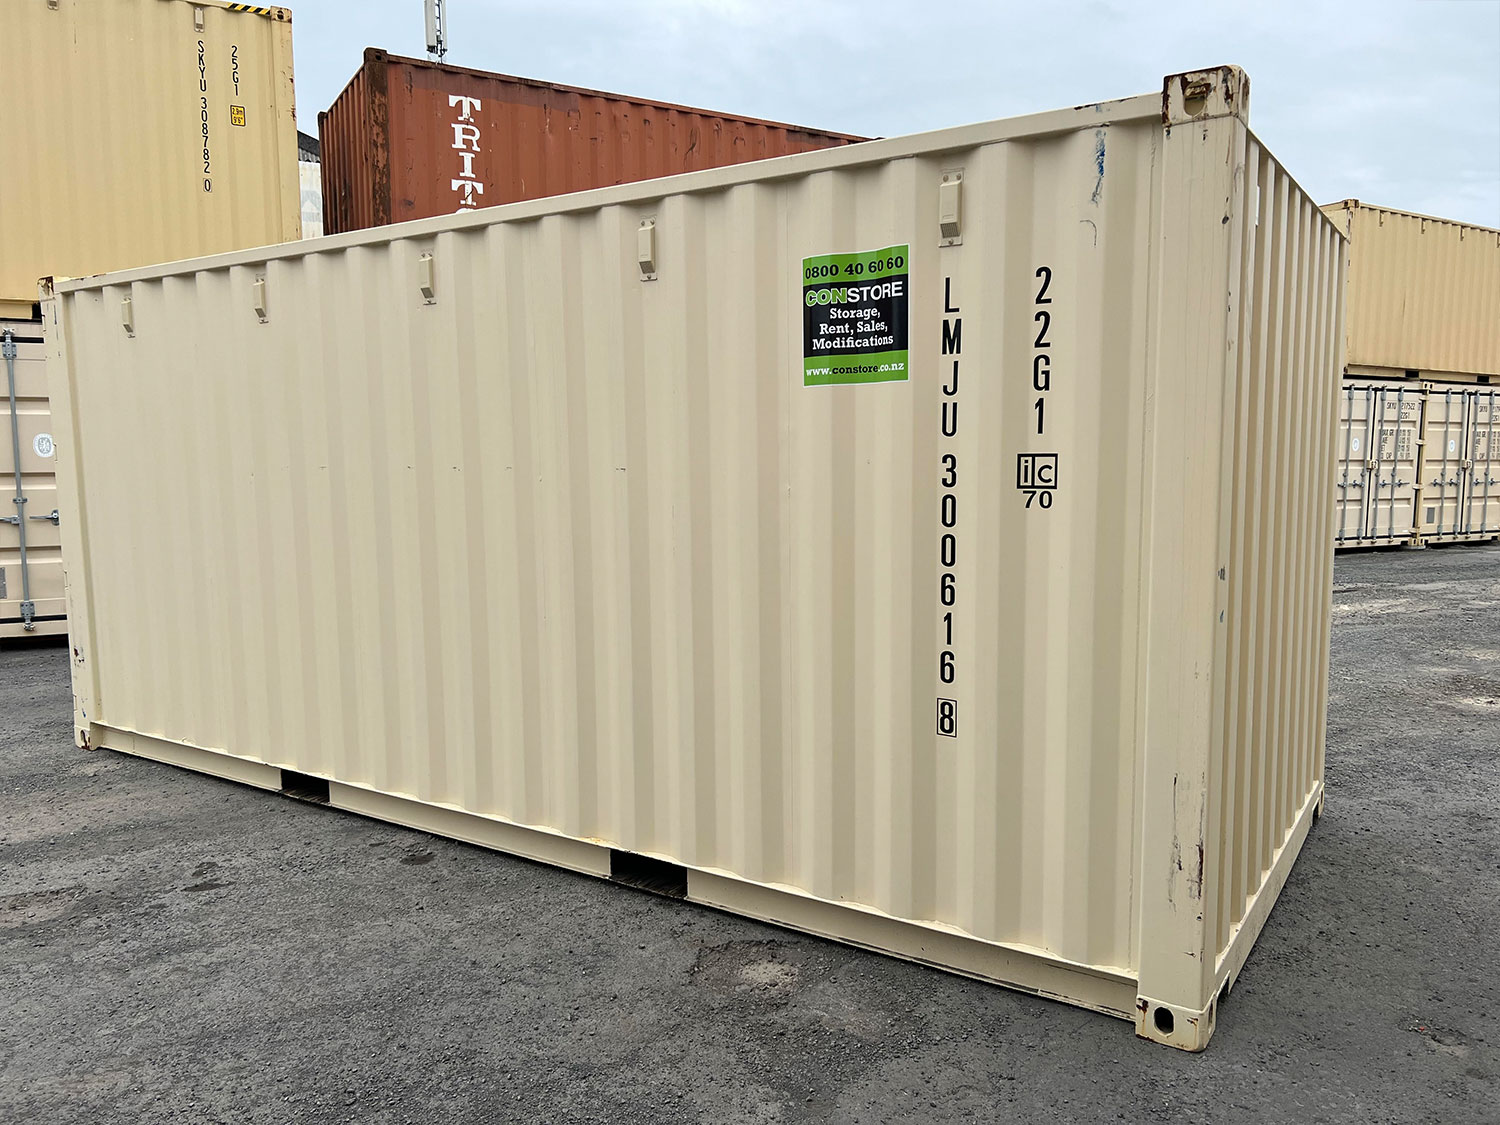 constore-auckland-new-zealand-containers-for-sale-and-rental-storage-solutions-45